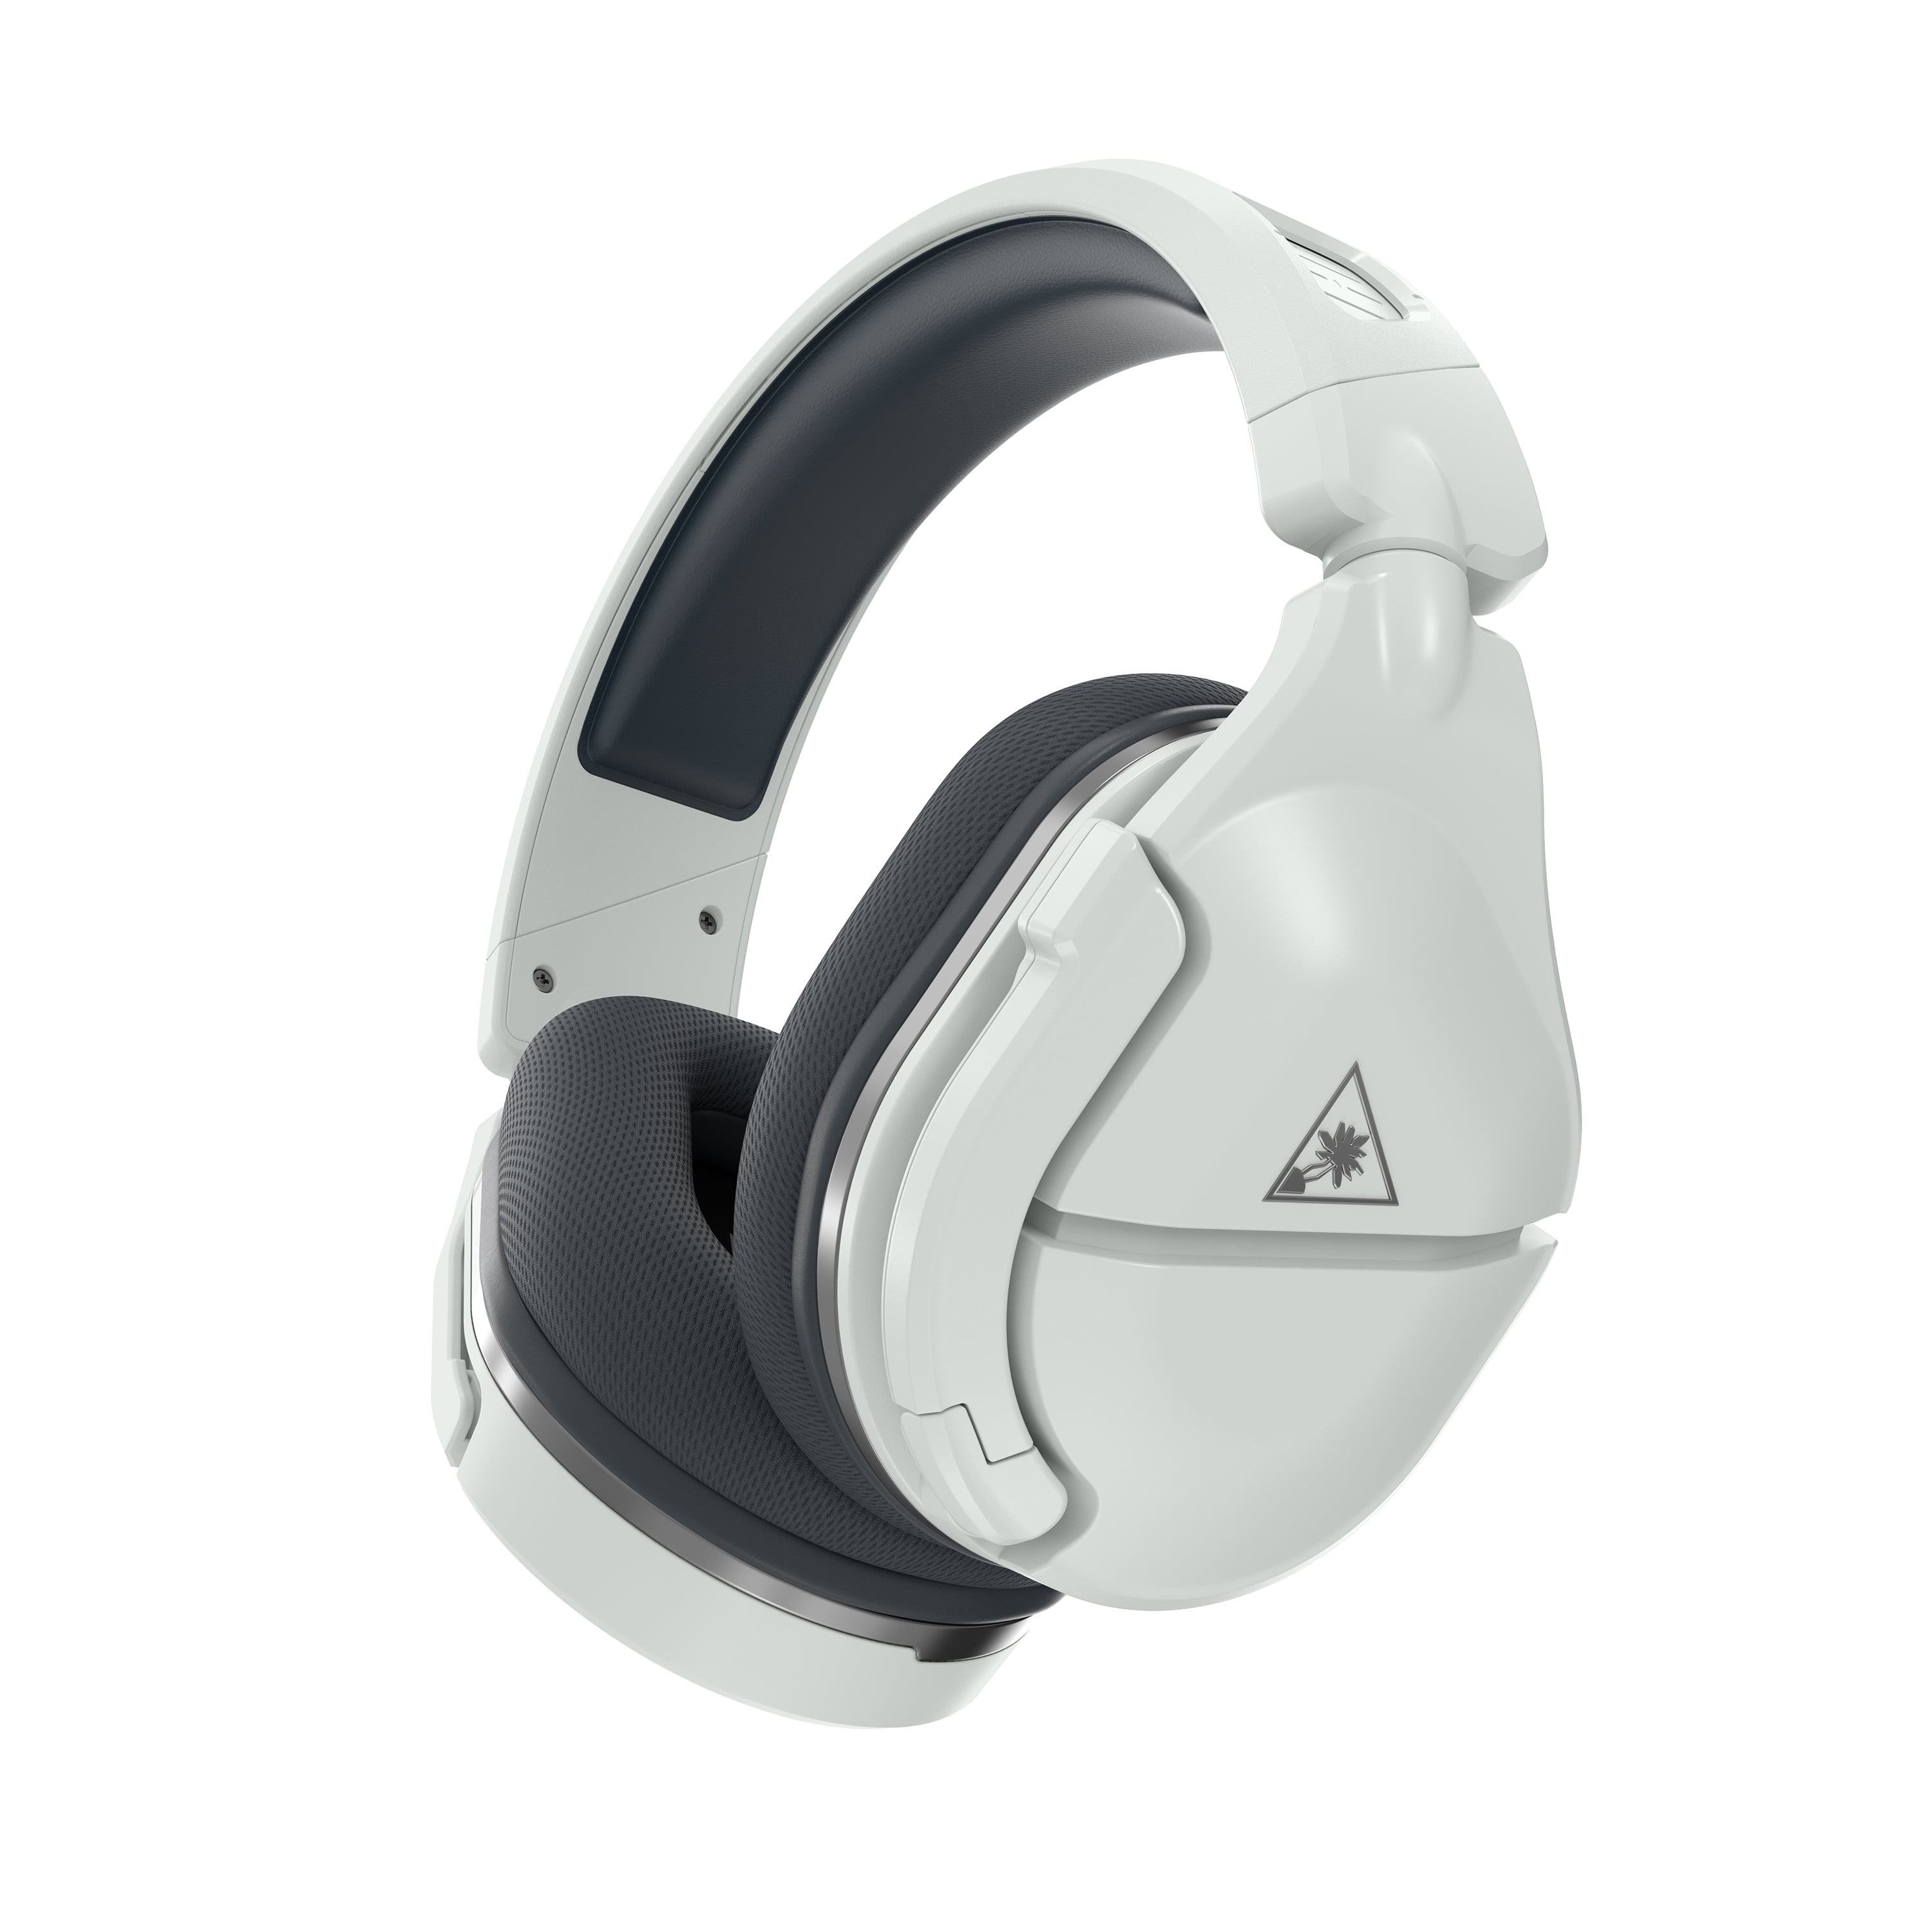 elektrode Alert gåde Turtle Beach Stealth 600 Gen 2 Wireless Gaming Headset for PS5, PS4, PS4  Pro, PlayStation, & Nintendo Switch with 50mm Speakers, 15-Hour Battery  life, Flip-to-Mute Mic, and Spatial Audio - White -